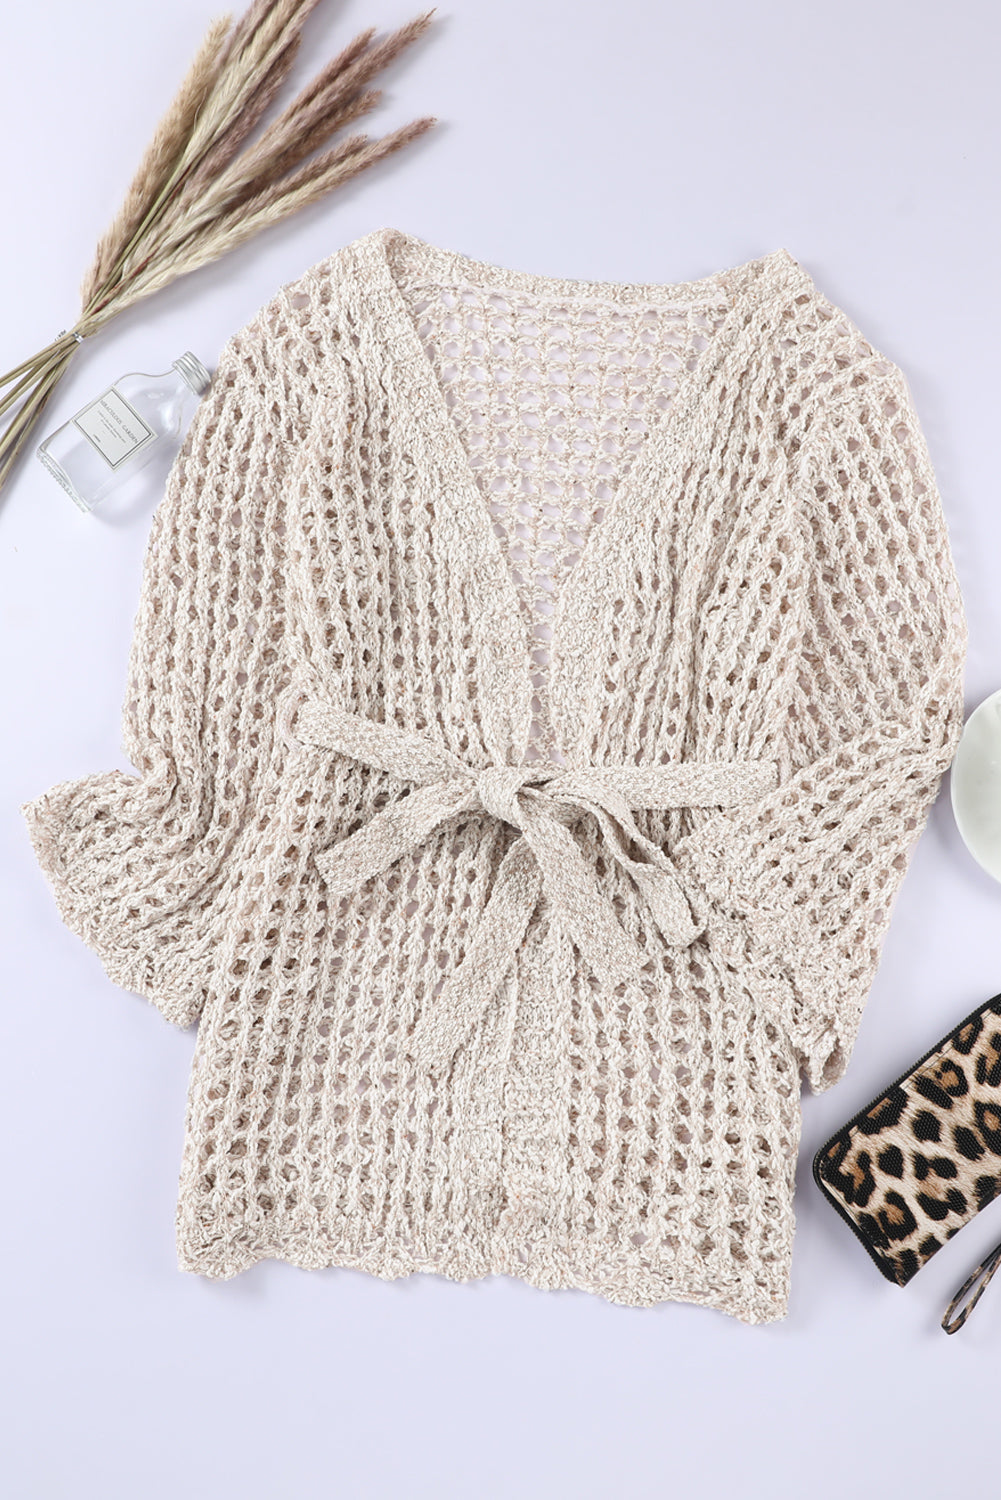 Apricot Knit Crochet Open Front Beach Cover Up with Tie